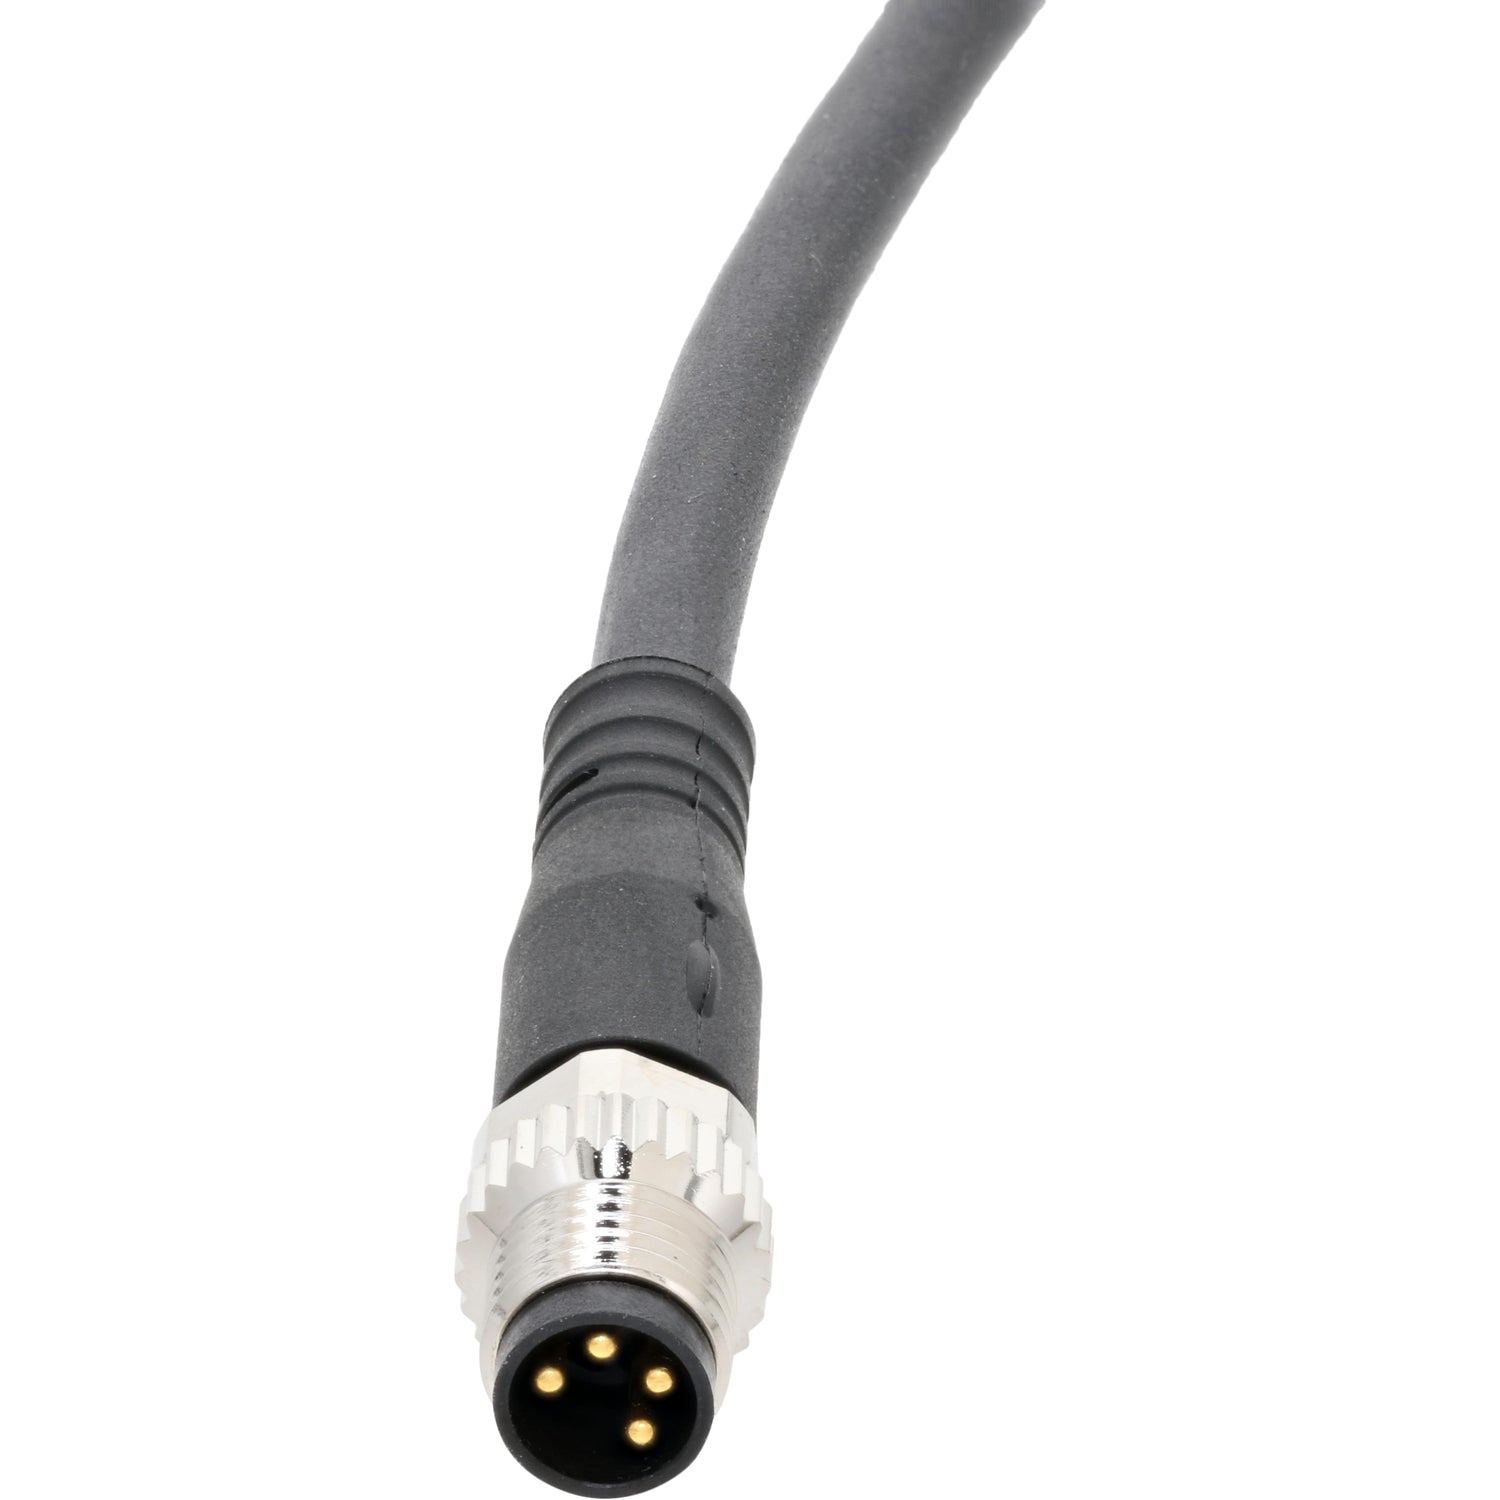 Black connecting cable with four pin nickel plated male connector on white background. 